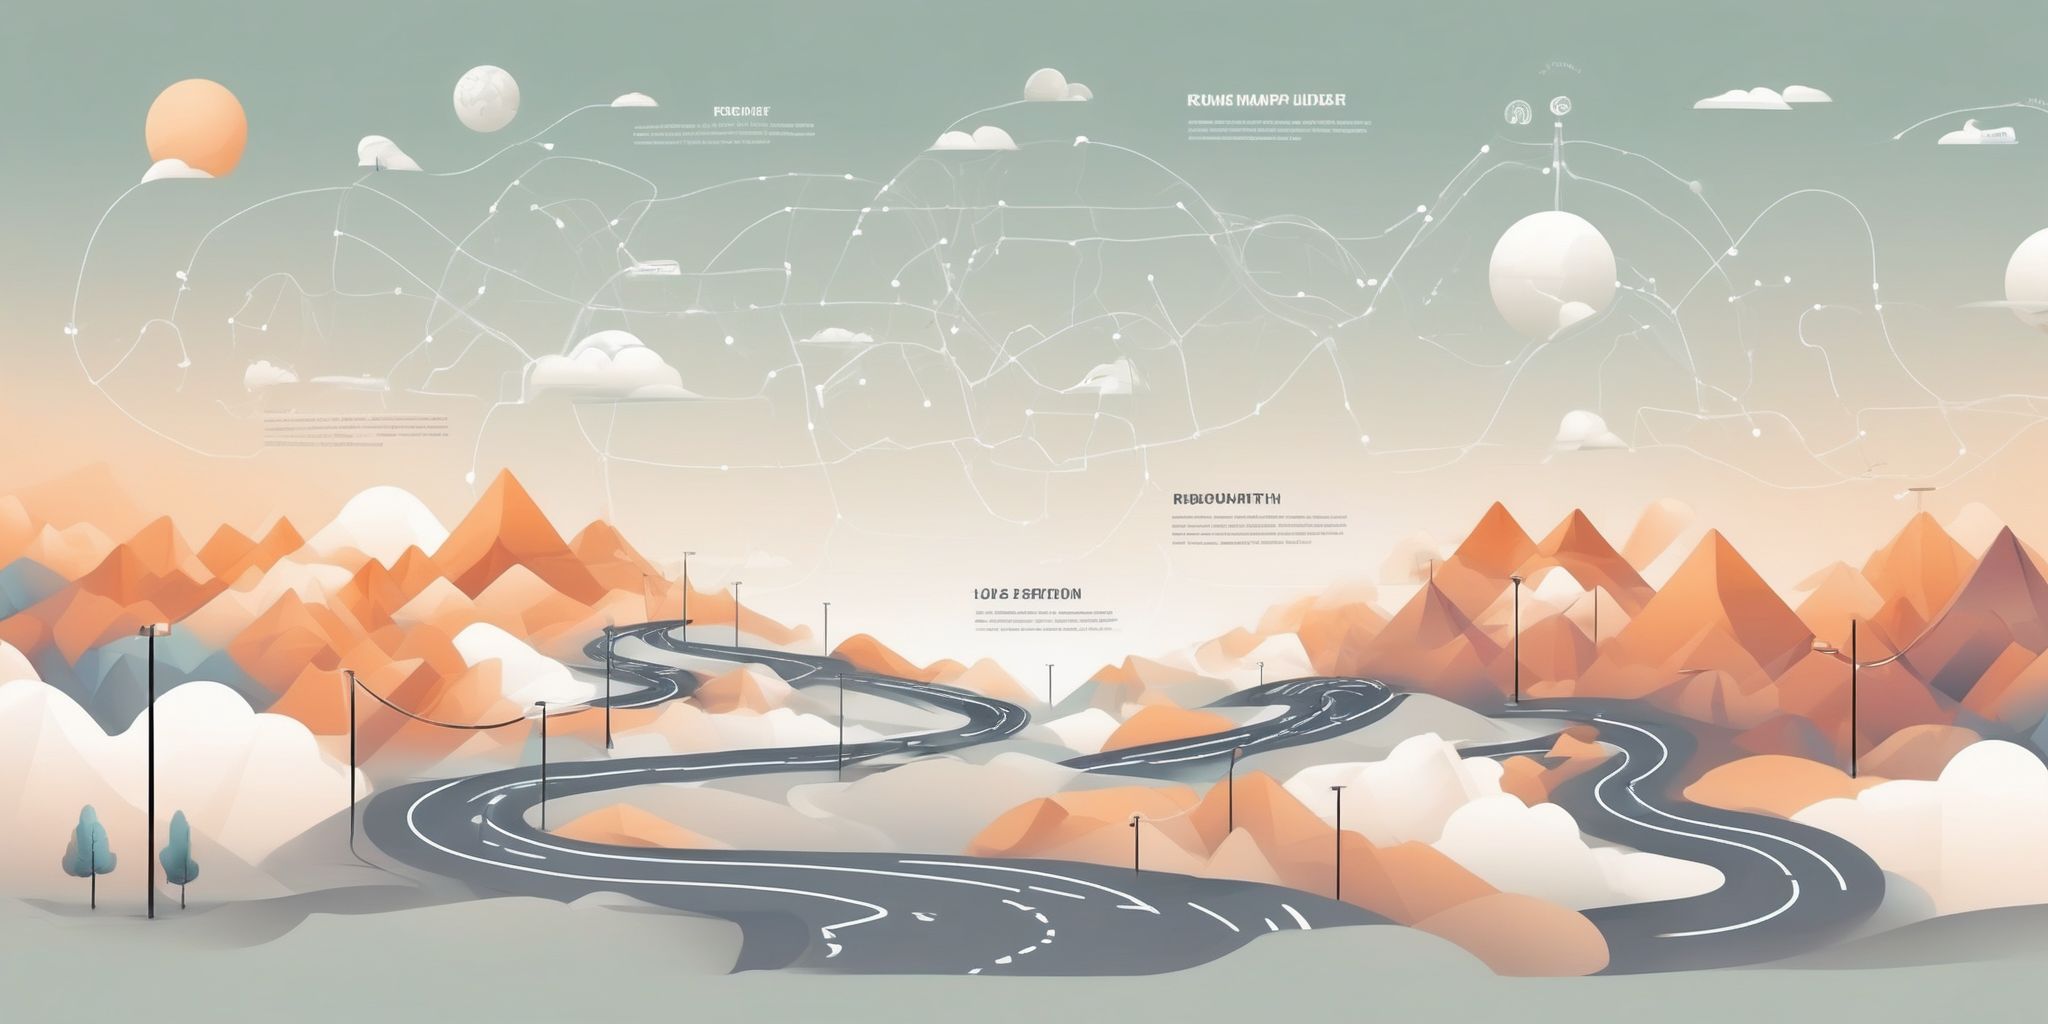 Roadmap for a journey in illustration style with gradients and white background